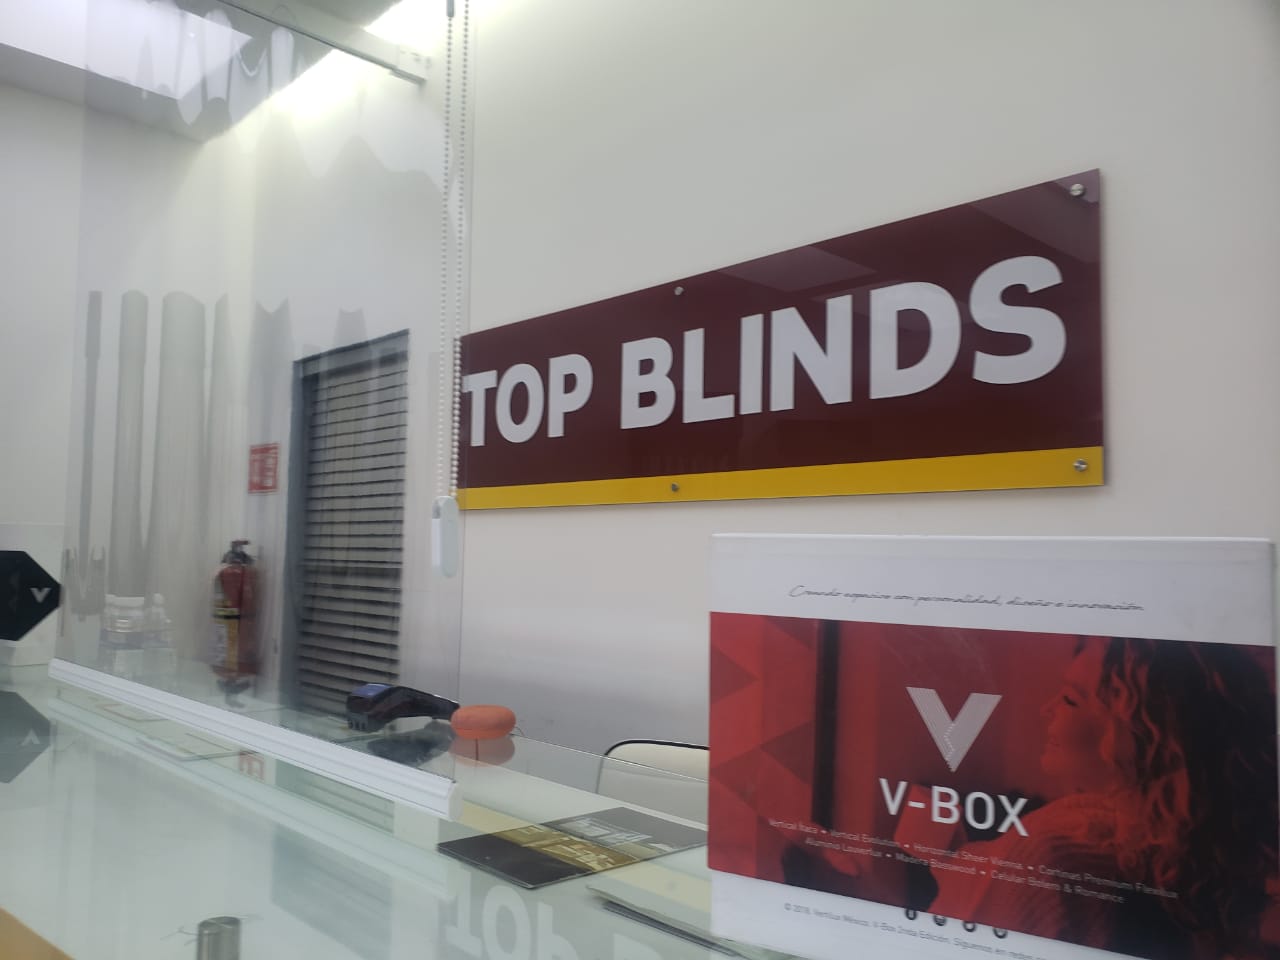 TOP BLINDS